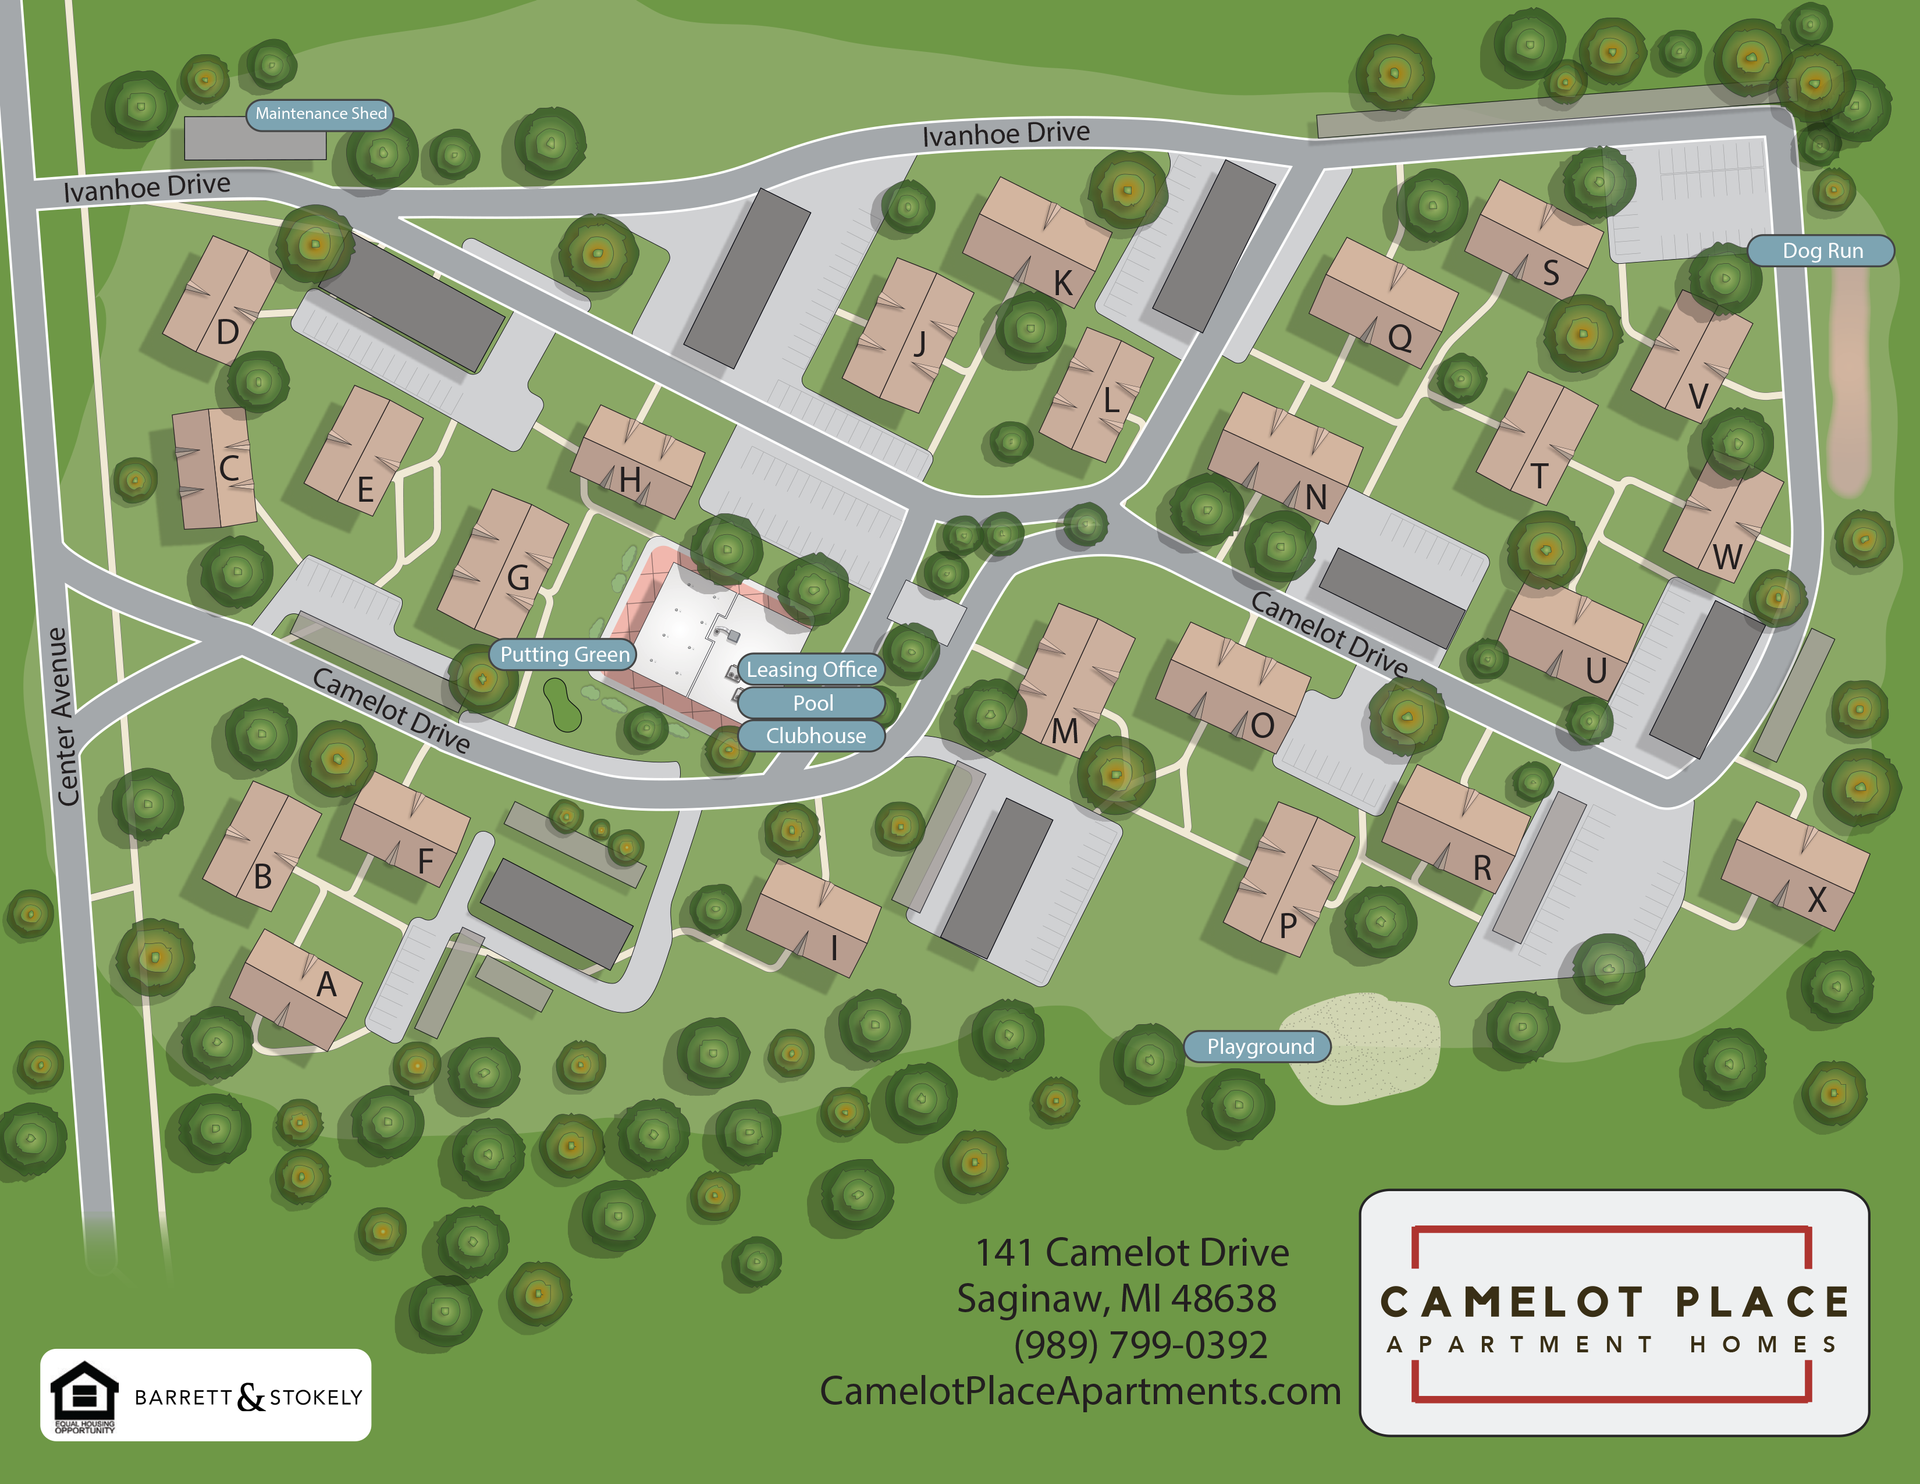 An aerial view of the Camelot Place apartment community. 